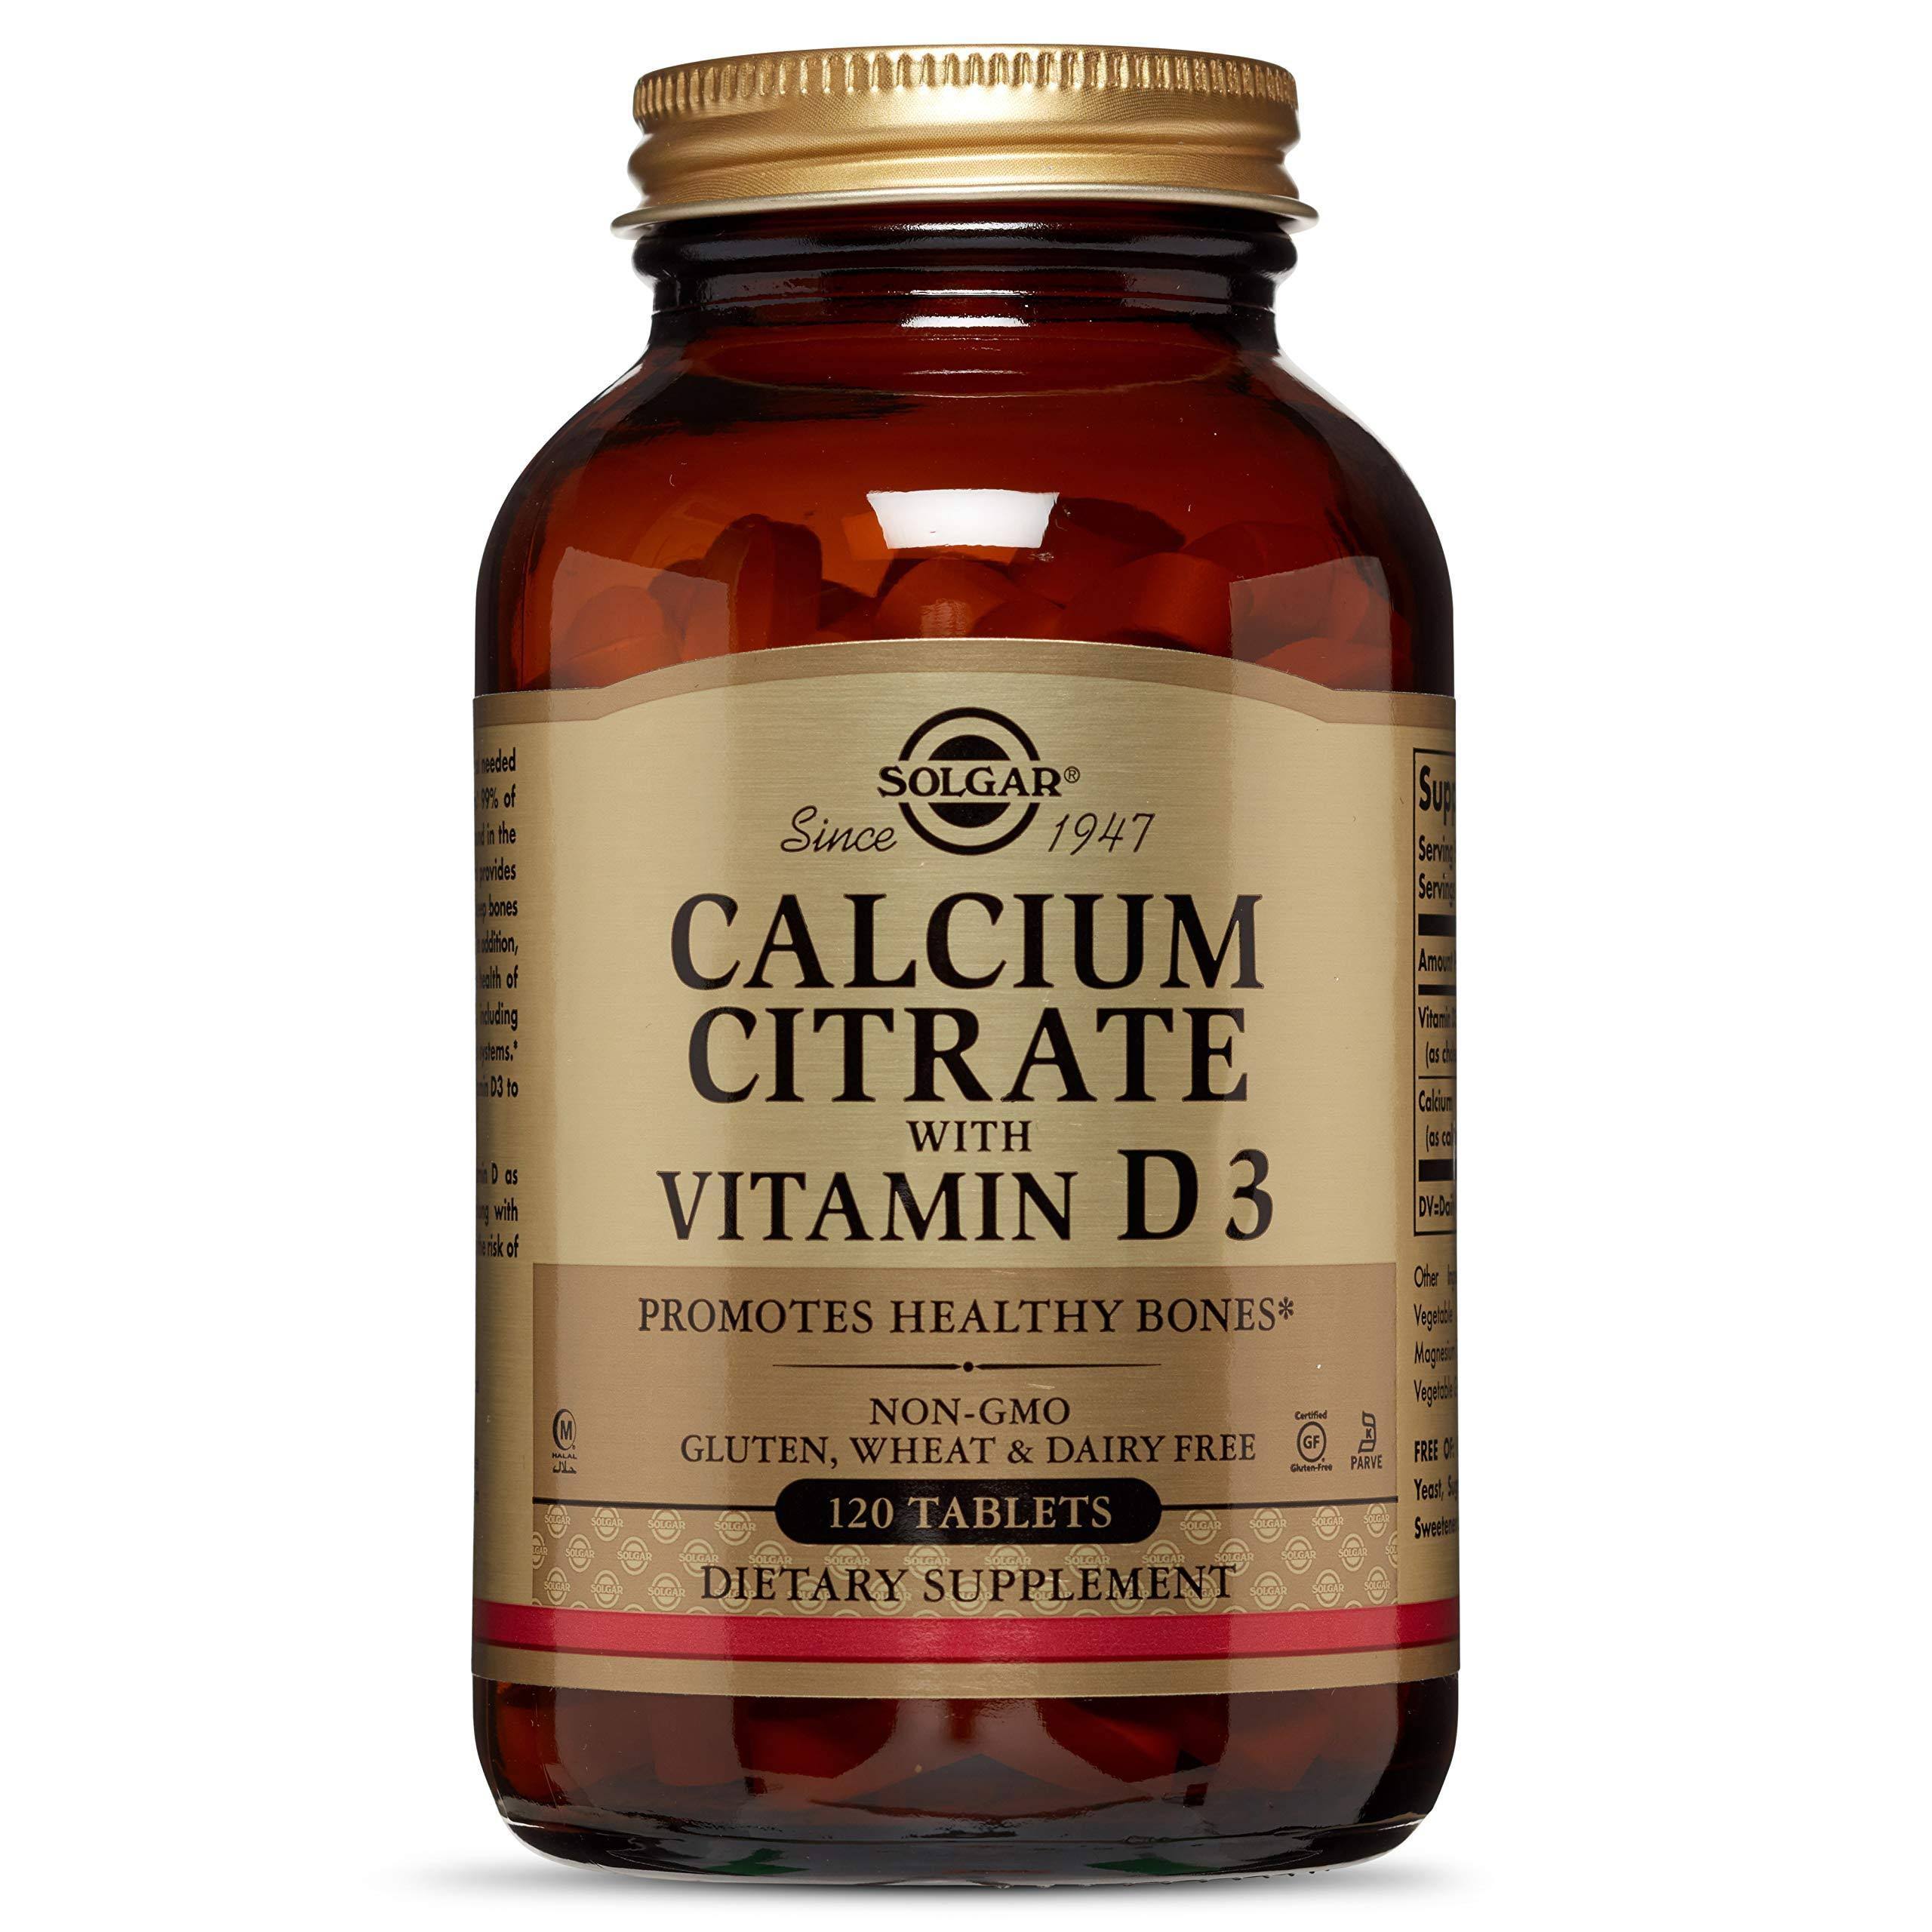 Solgar Calcium Citrate With Vitamin D3 Dietary Supplement - 120 Tablets